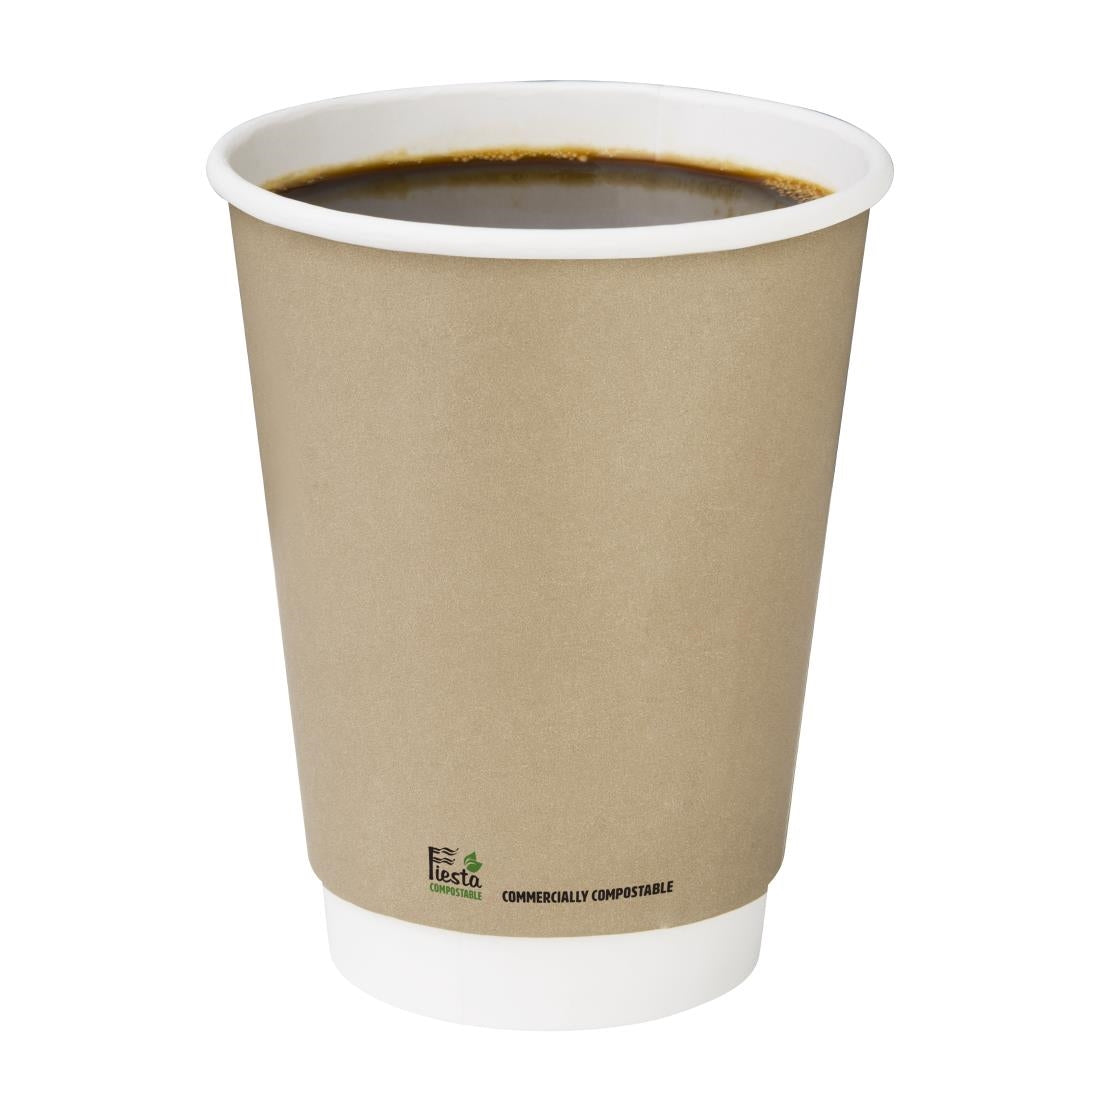 CU986 Fiesta Compostable Coffee Cups Double Wall 340ml (Pack of 500)